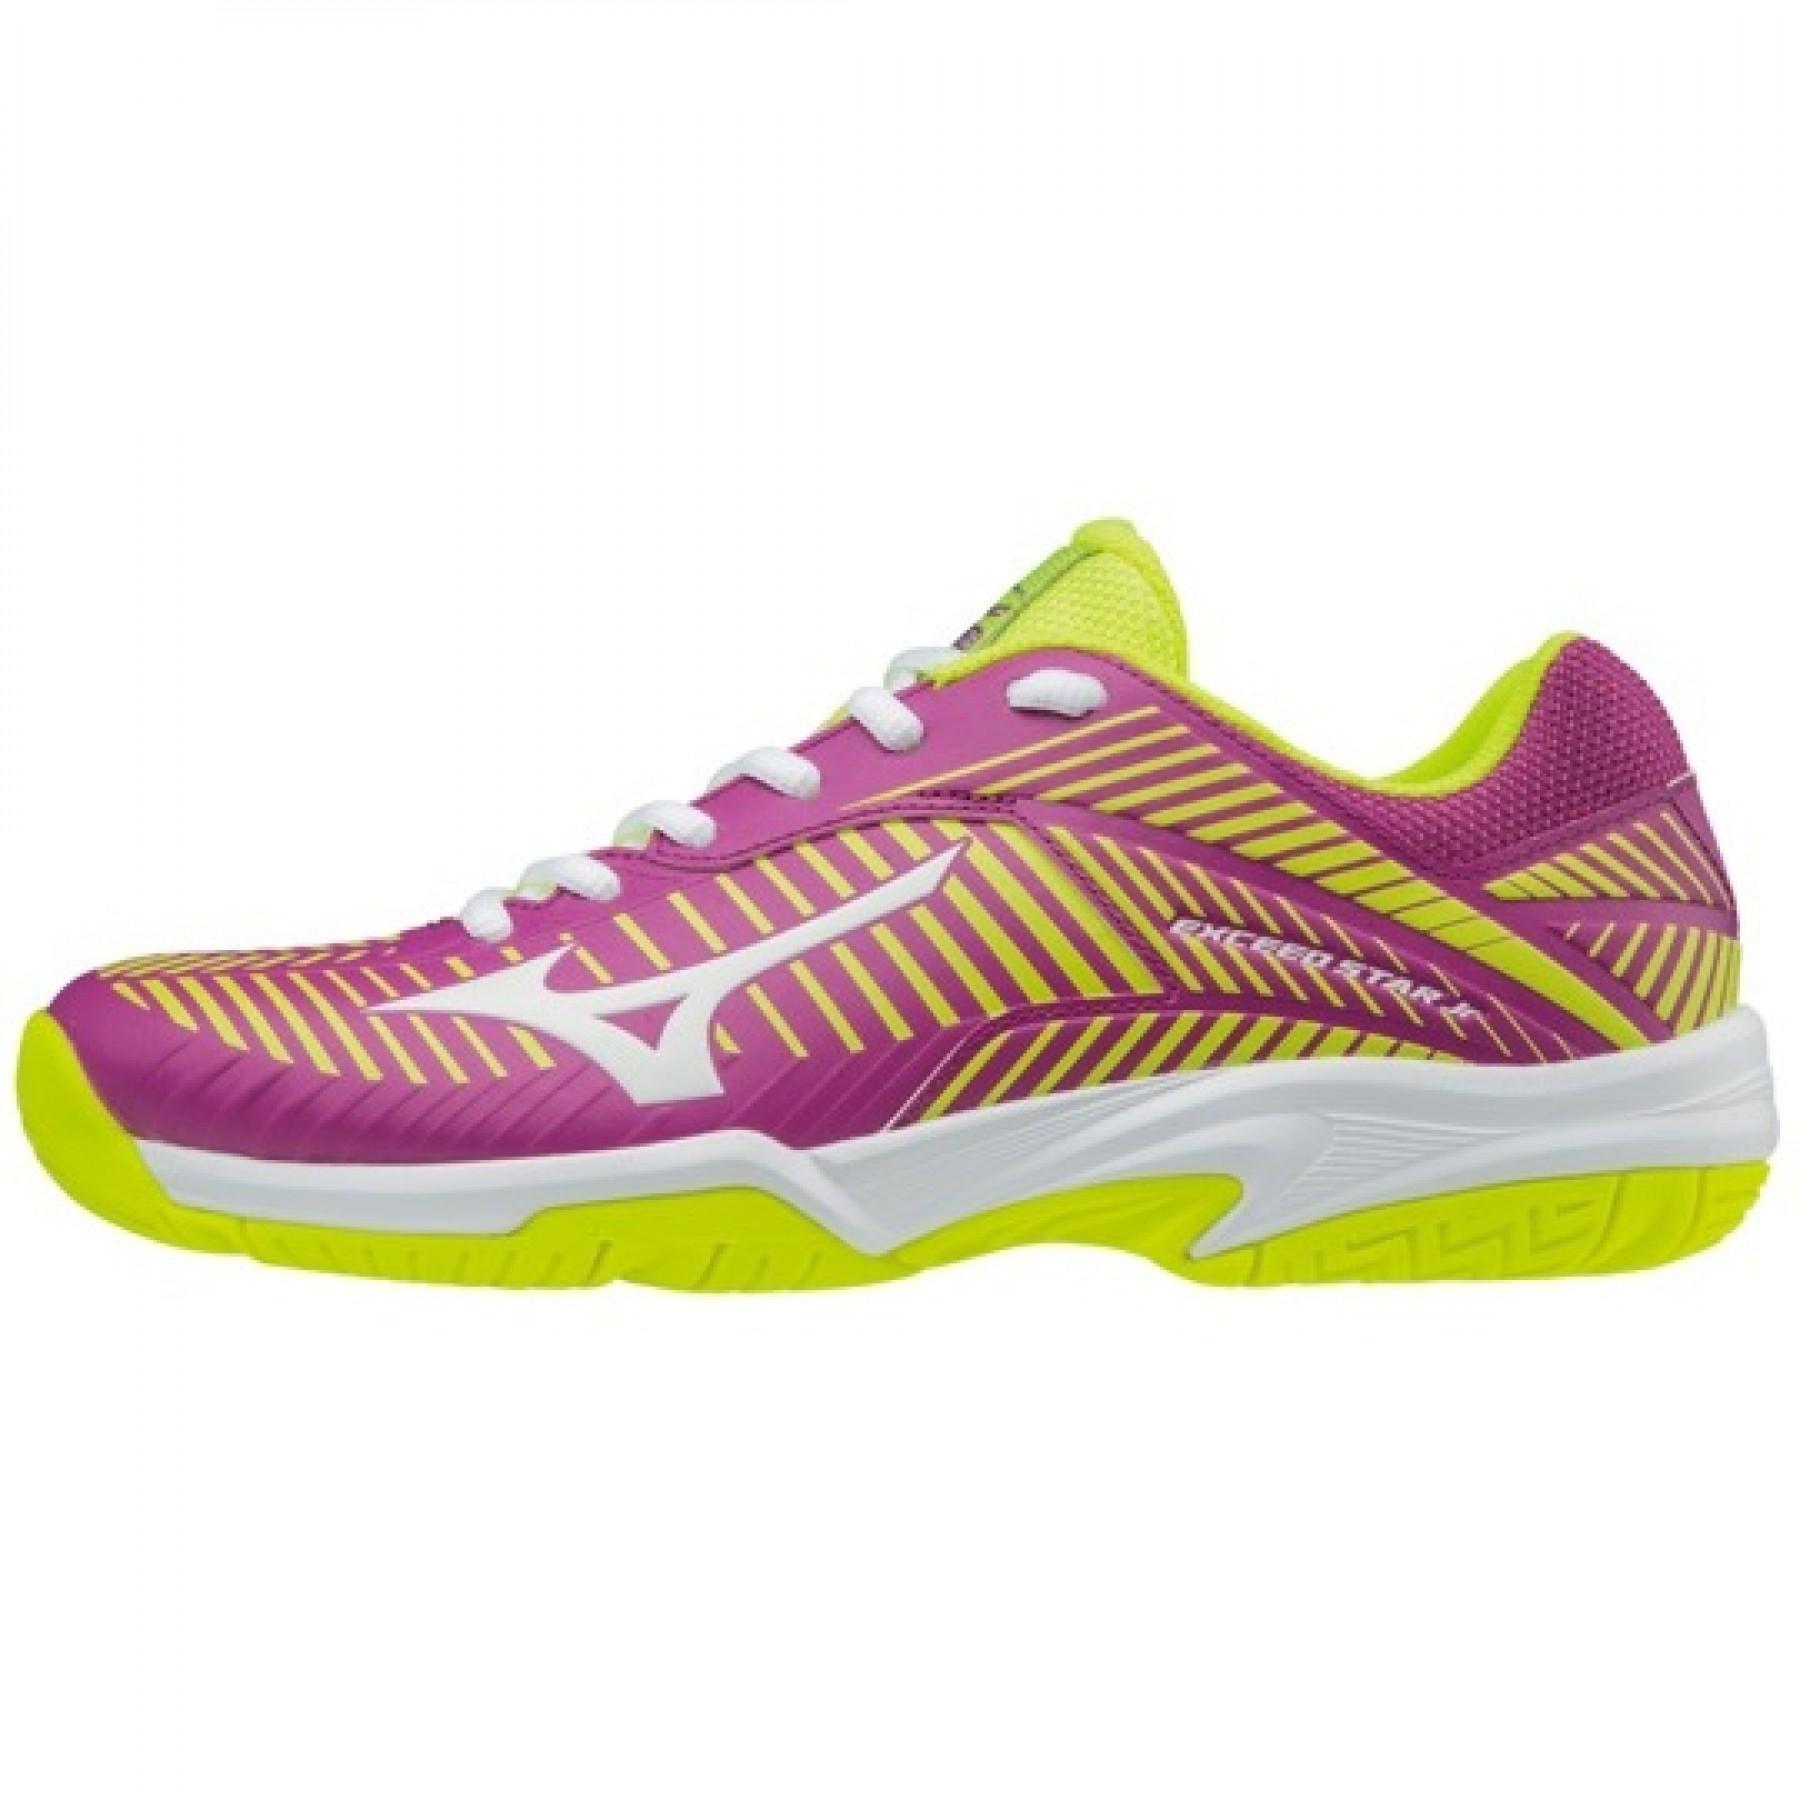 Chaussures Mizuno Exceed Star JR 2